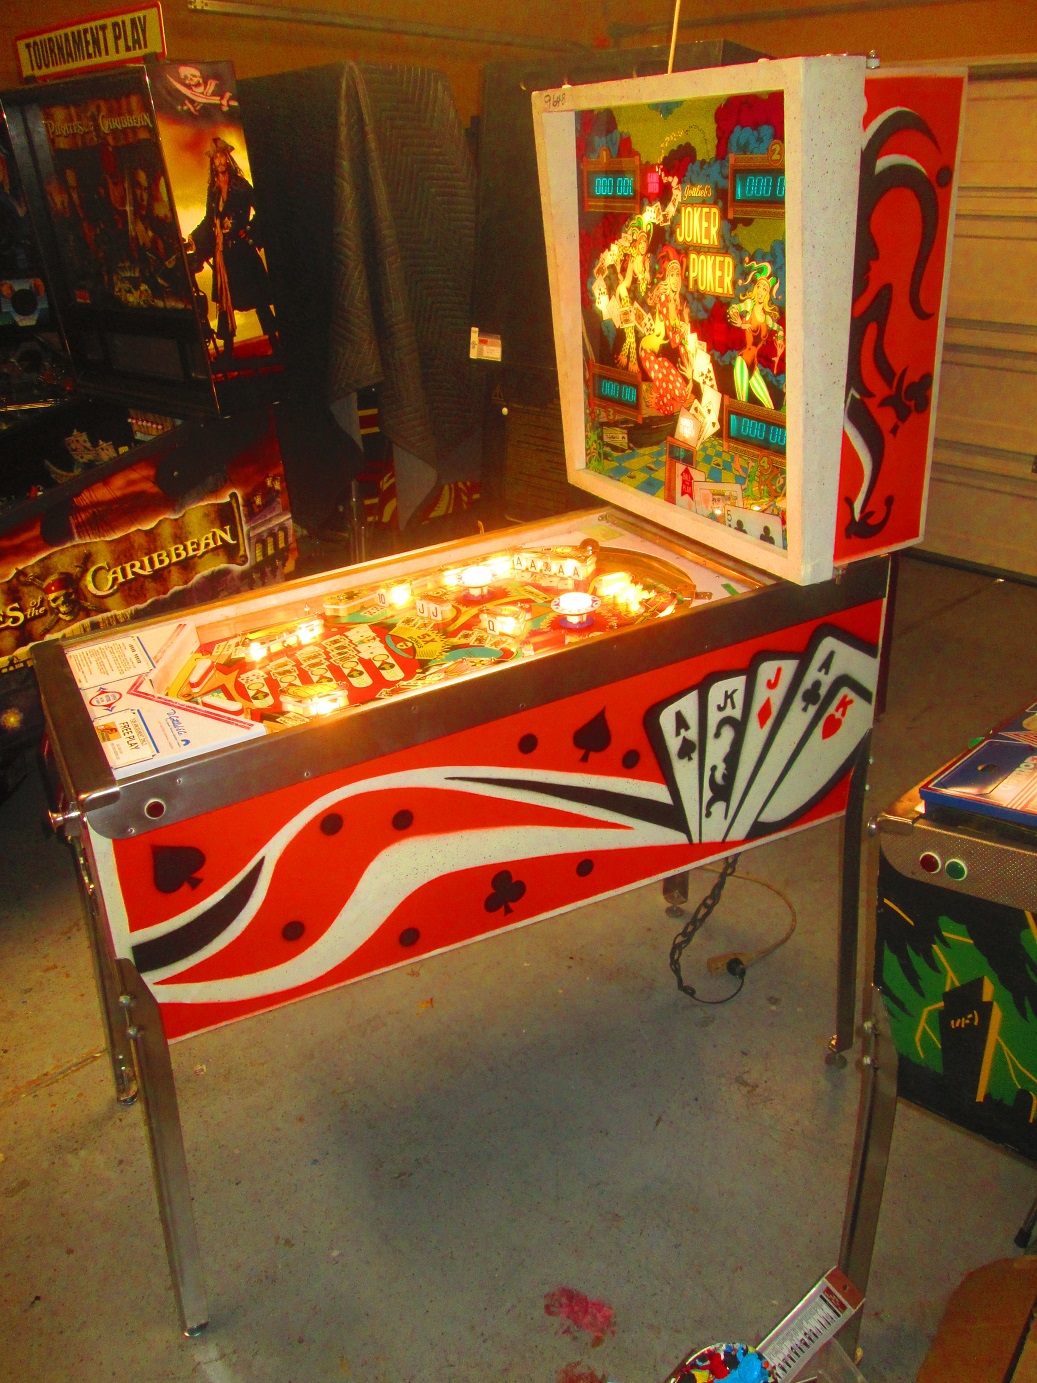 Gottlieb also produced an electro-mechanical version of Joker Poker, producing around 820 machines of that model.